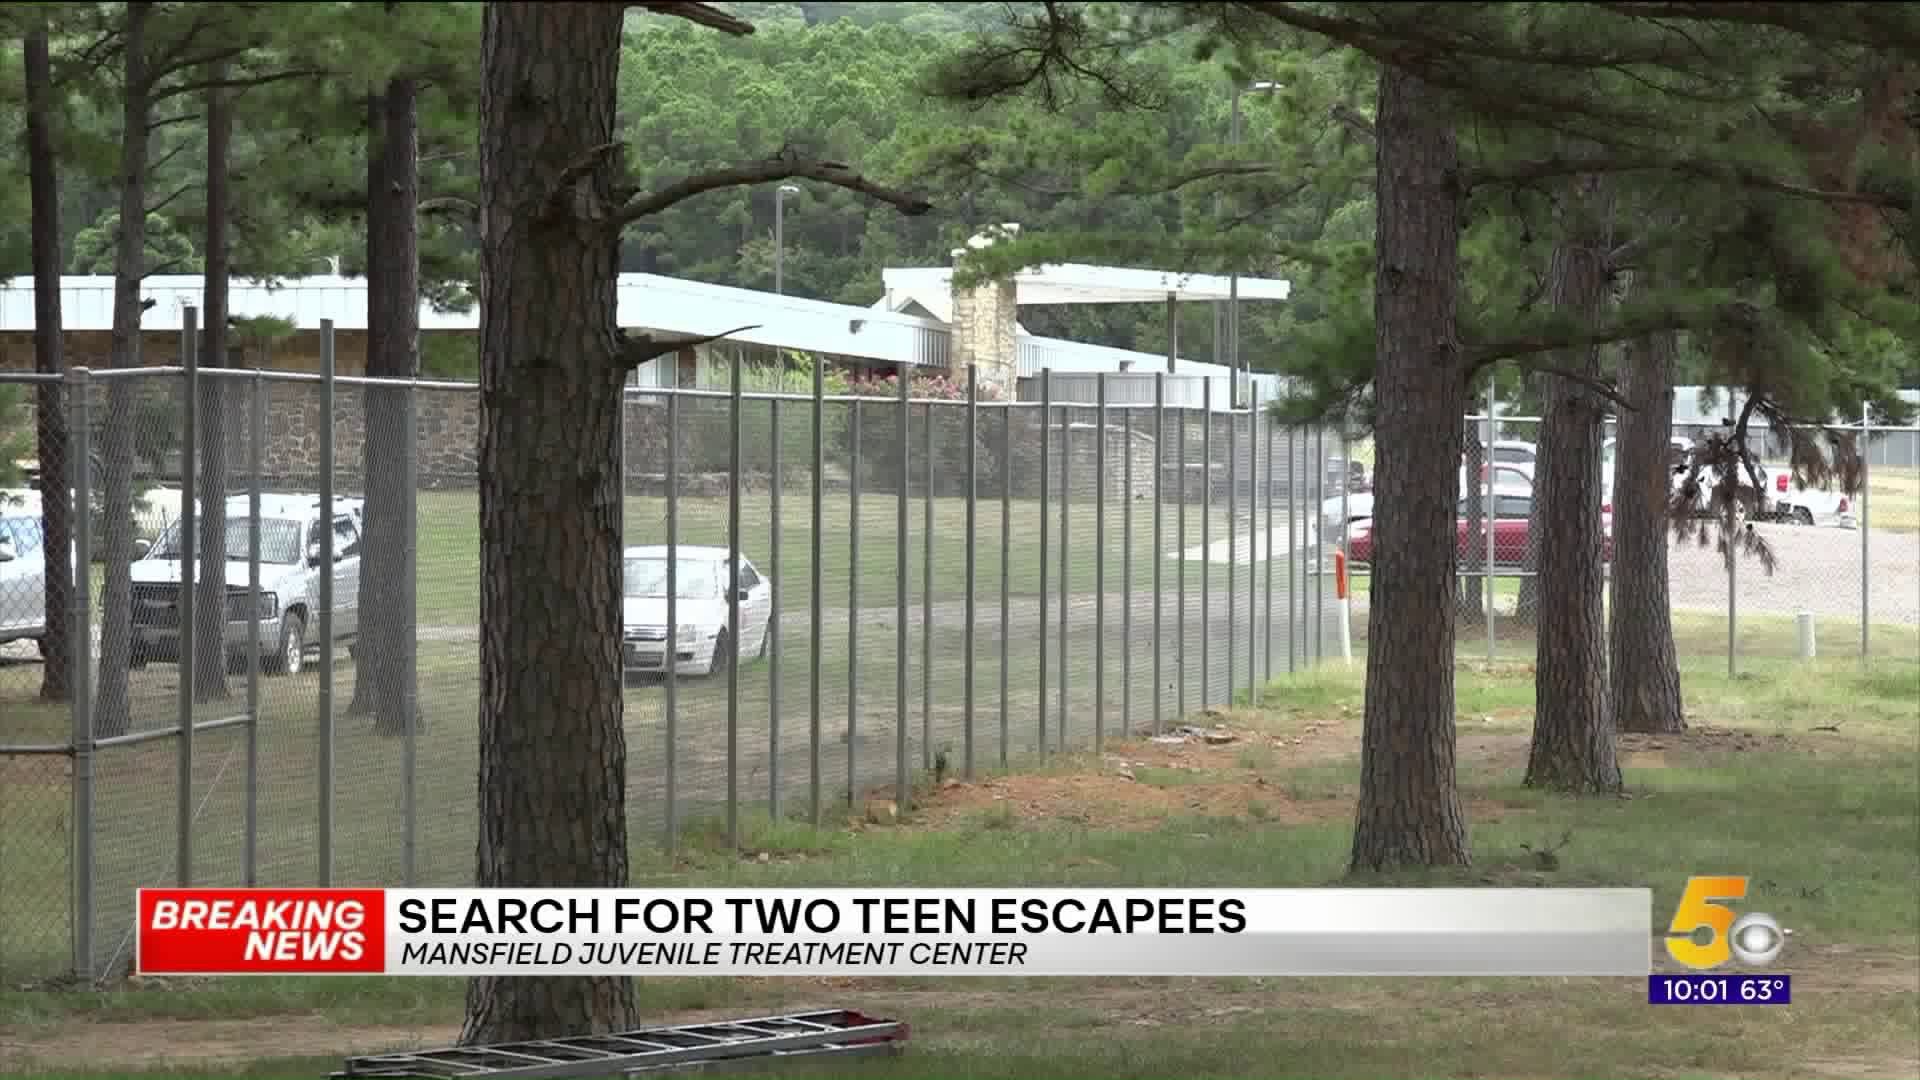 Authorities Searching For 2 Escapees From Mansfield Juvenile Treatment Center